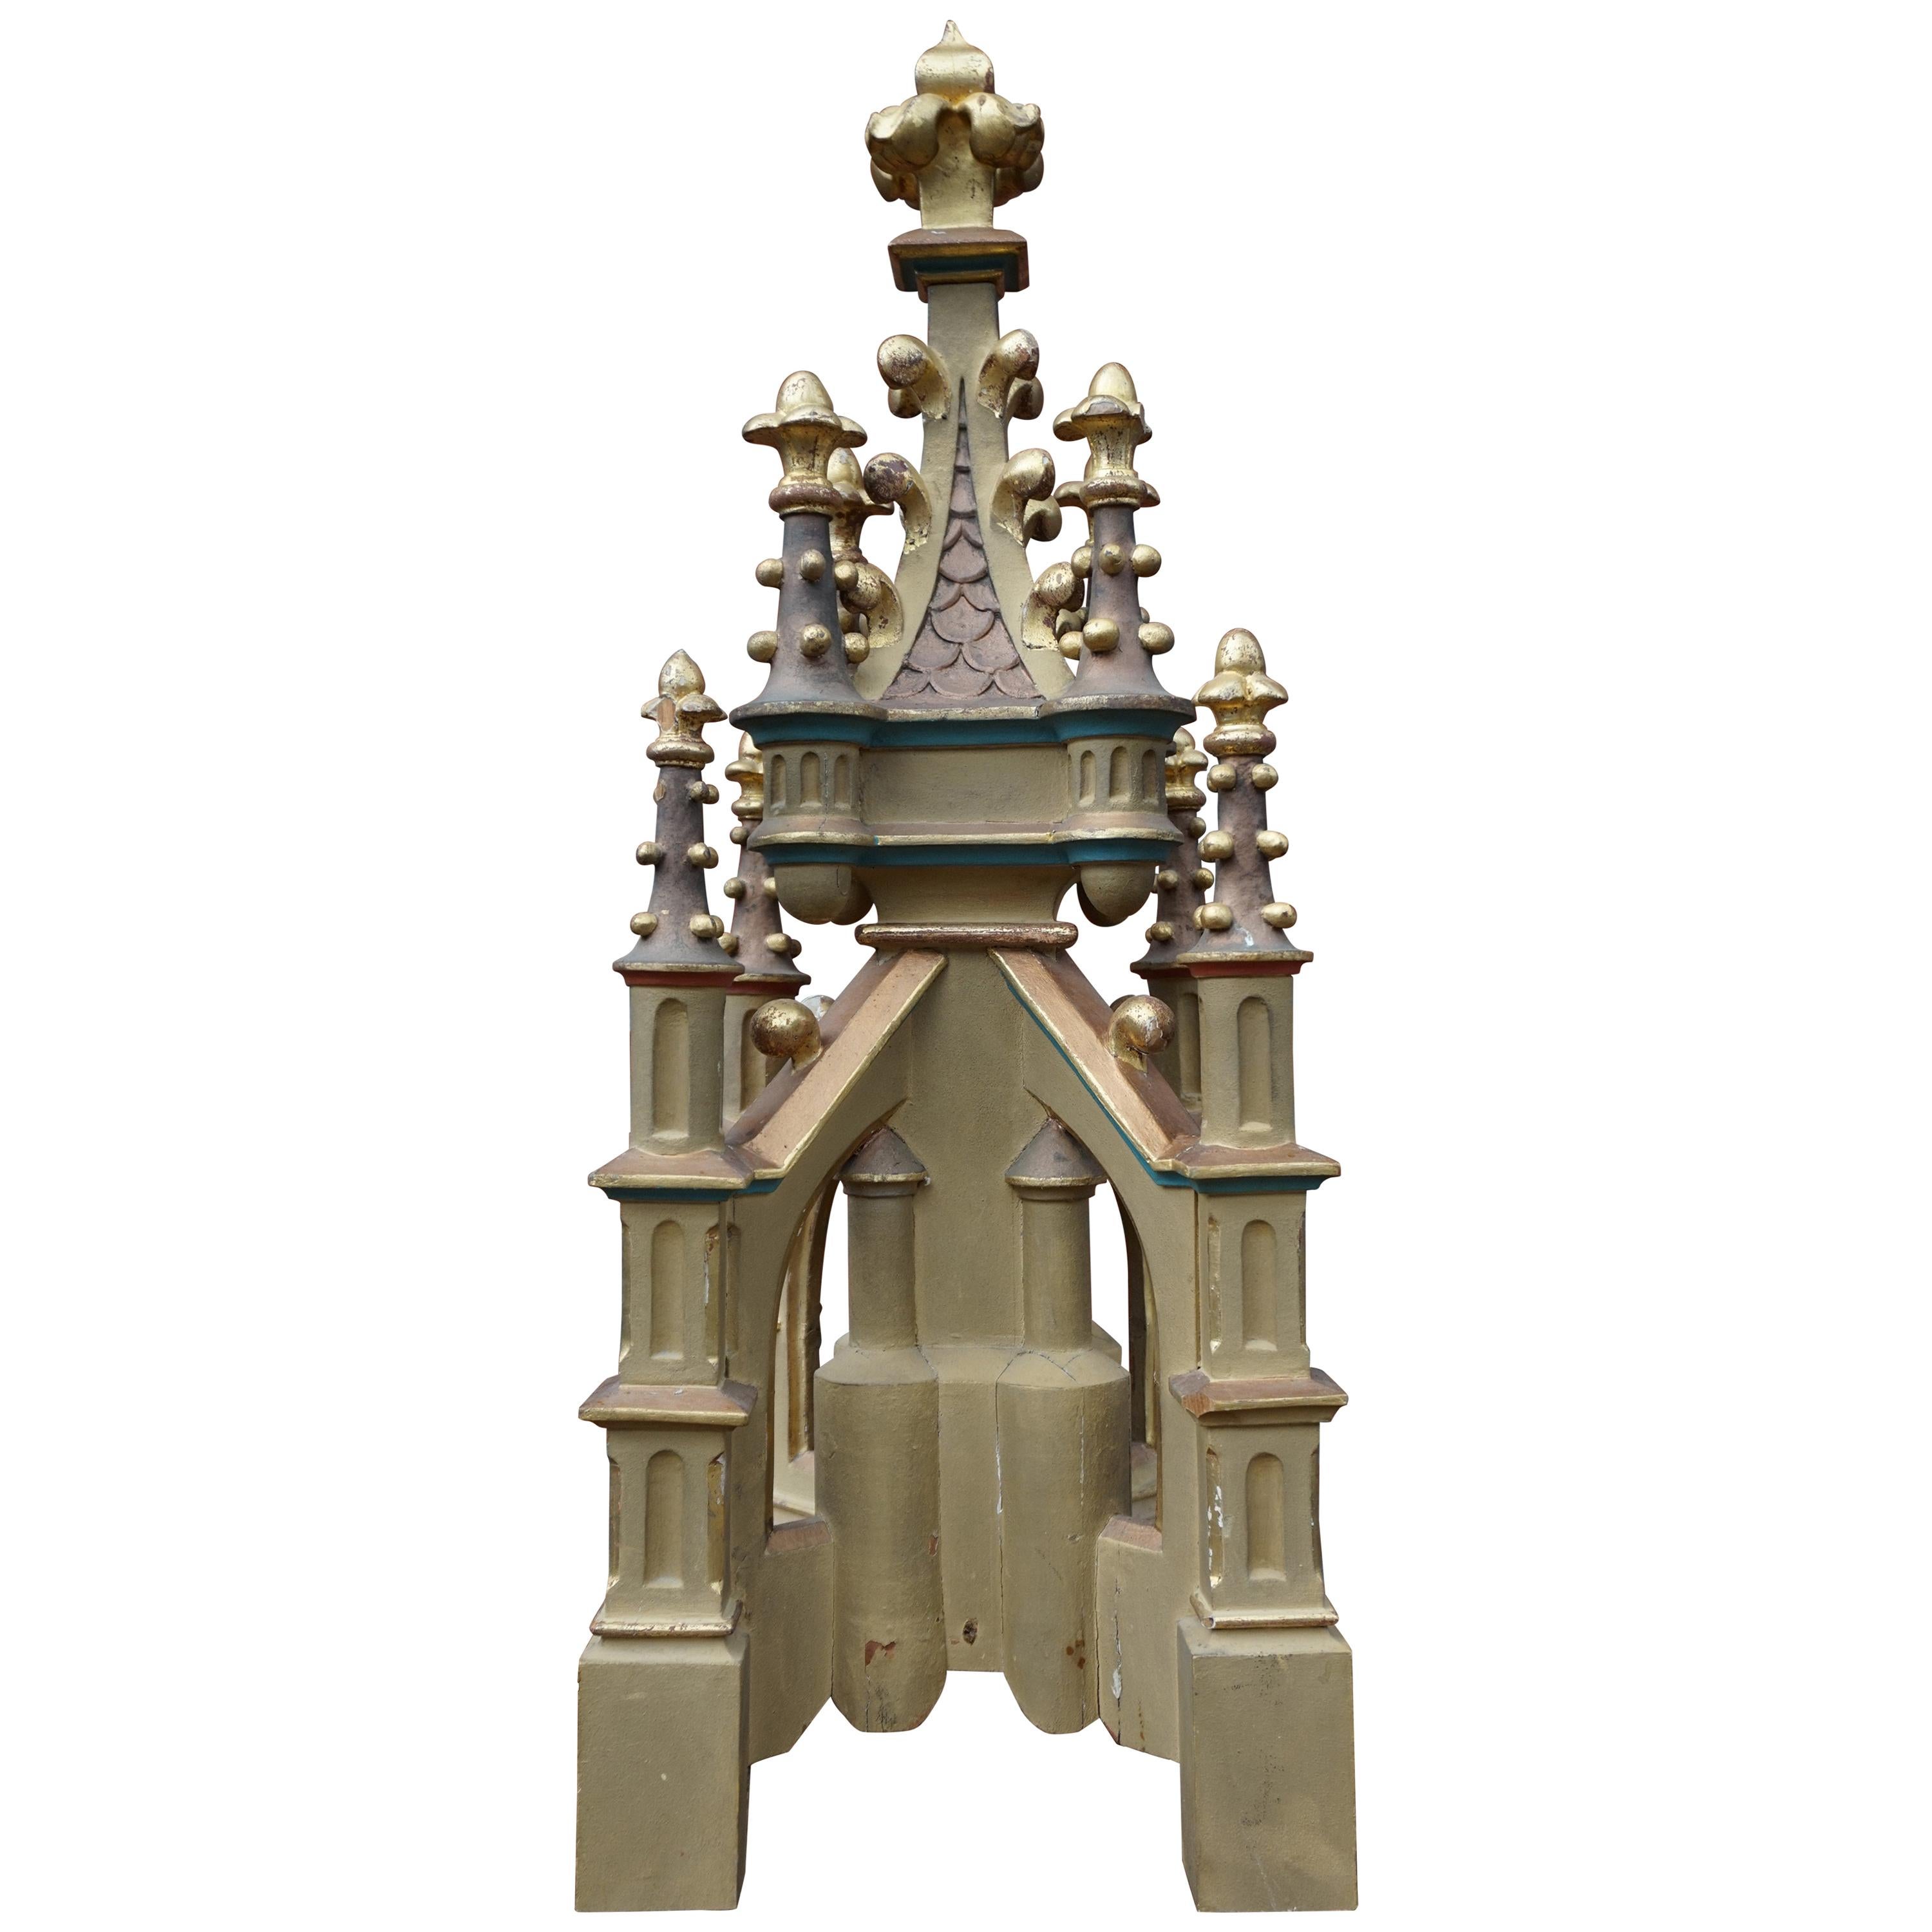 Antique Hand Carved and Hand Painted Wooden Gothic Tower Model with Gilt Finials